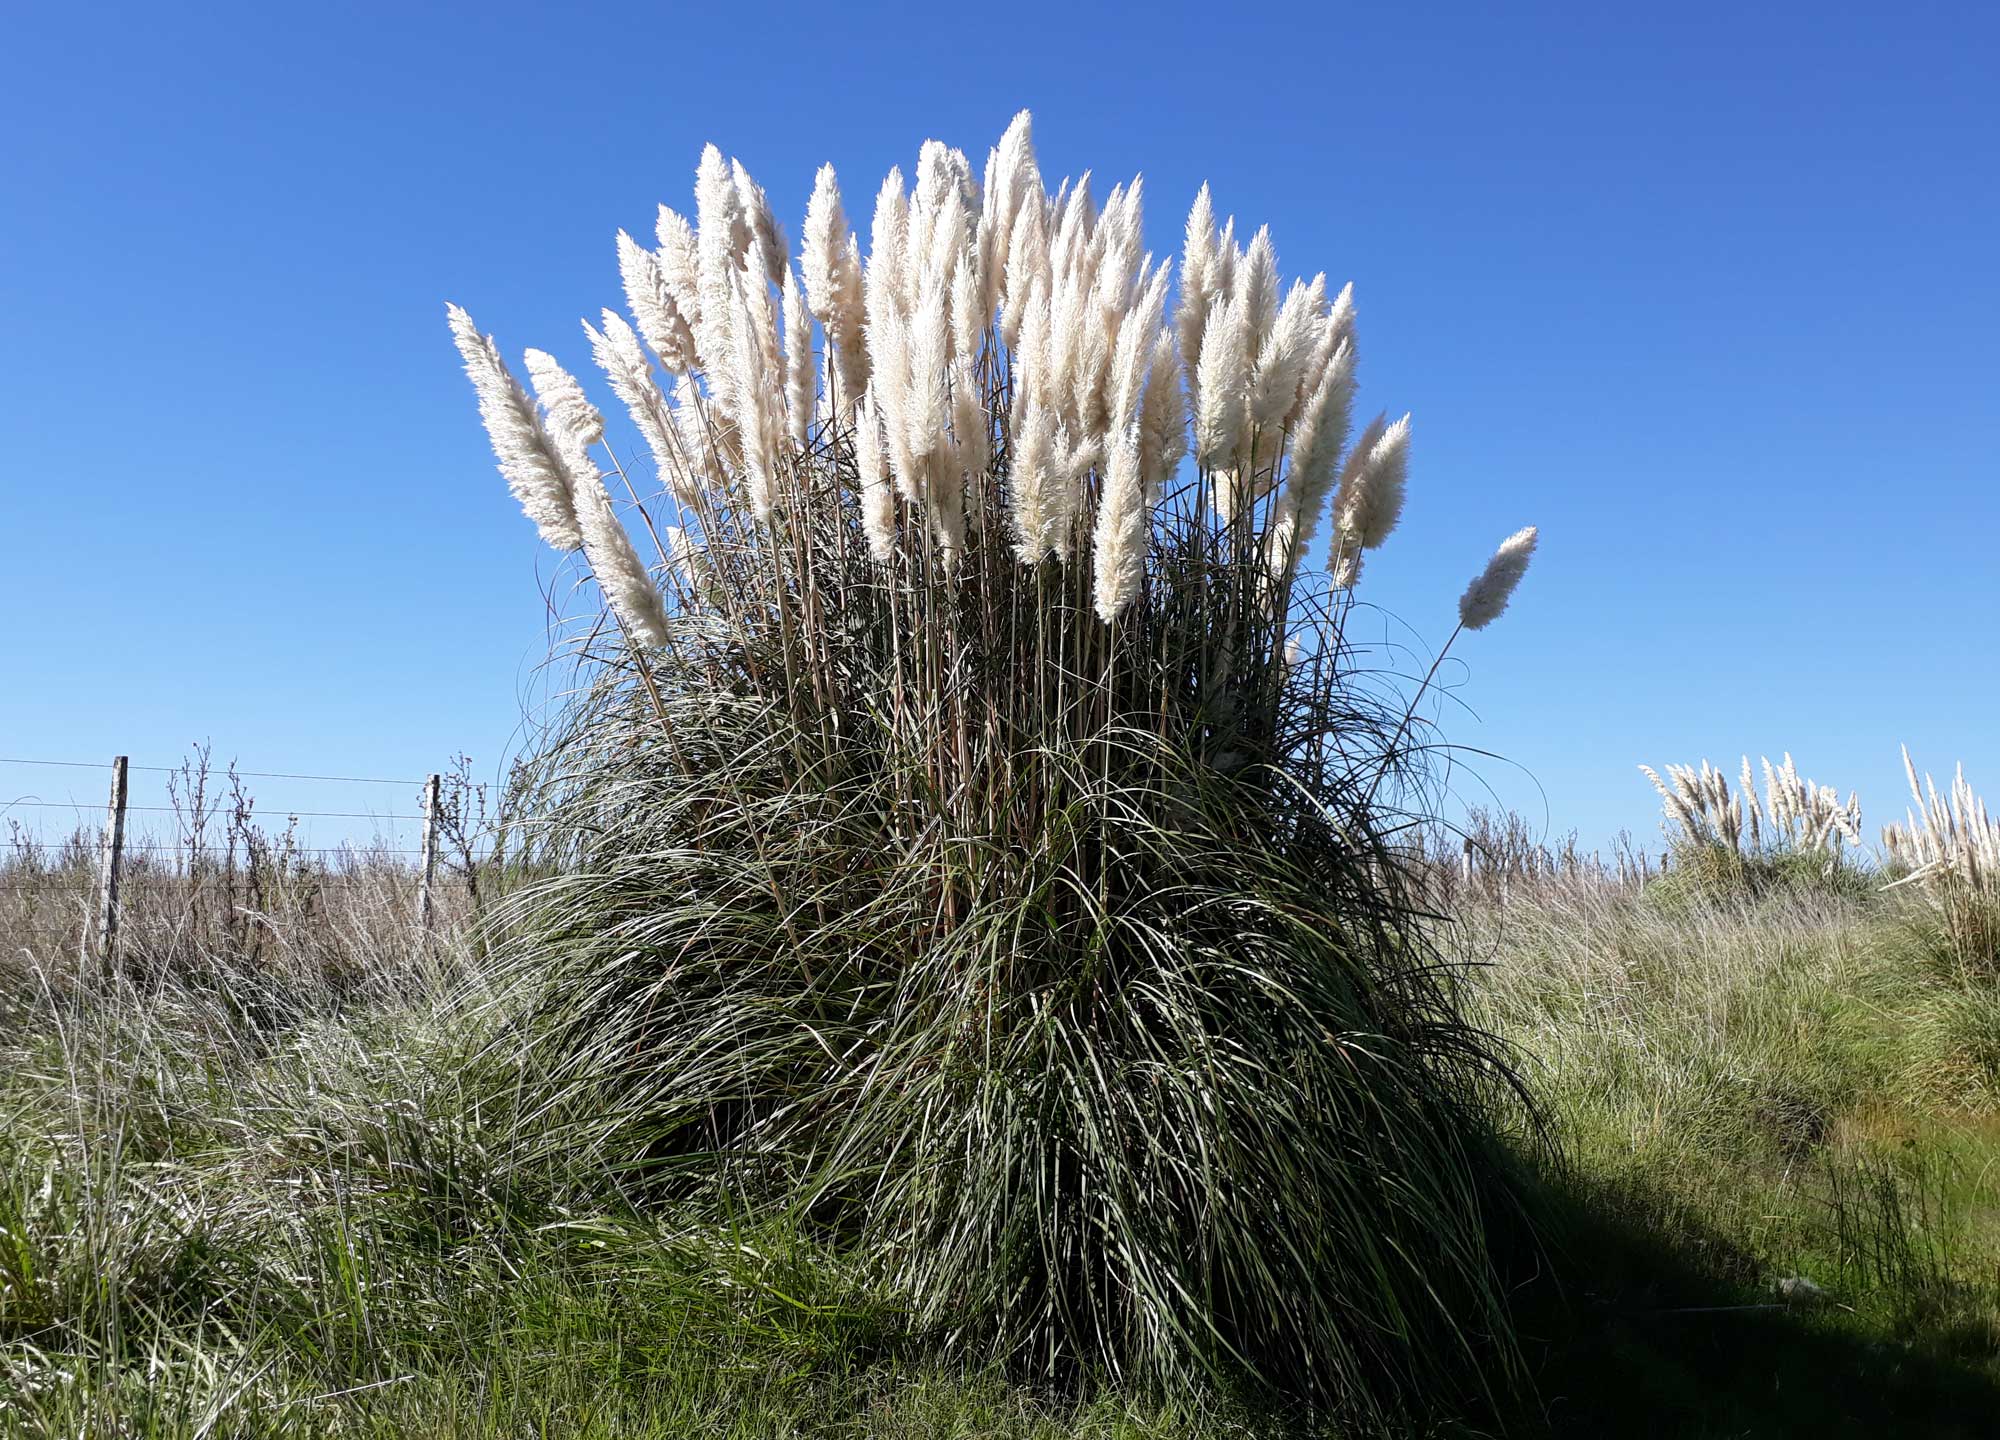 Photograph of a clump of pamaps grass in a field. The photo shows a cluster of grass stems bearing long, thin leaves. Each stem ends in a feathery white inflorescence.